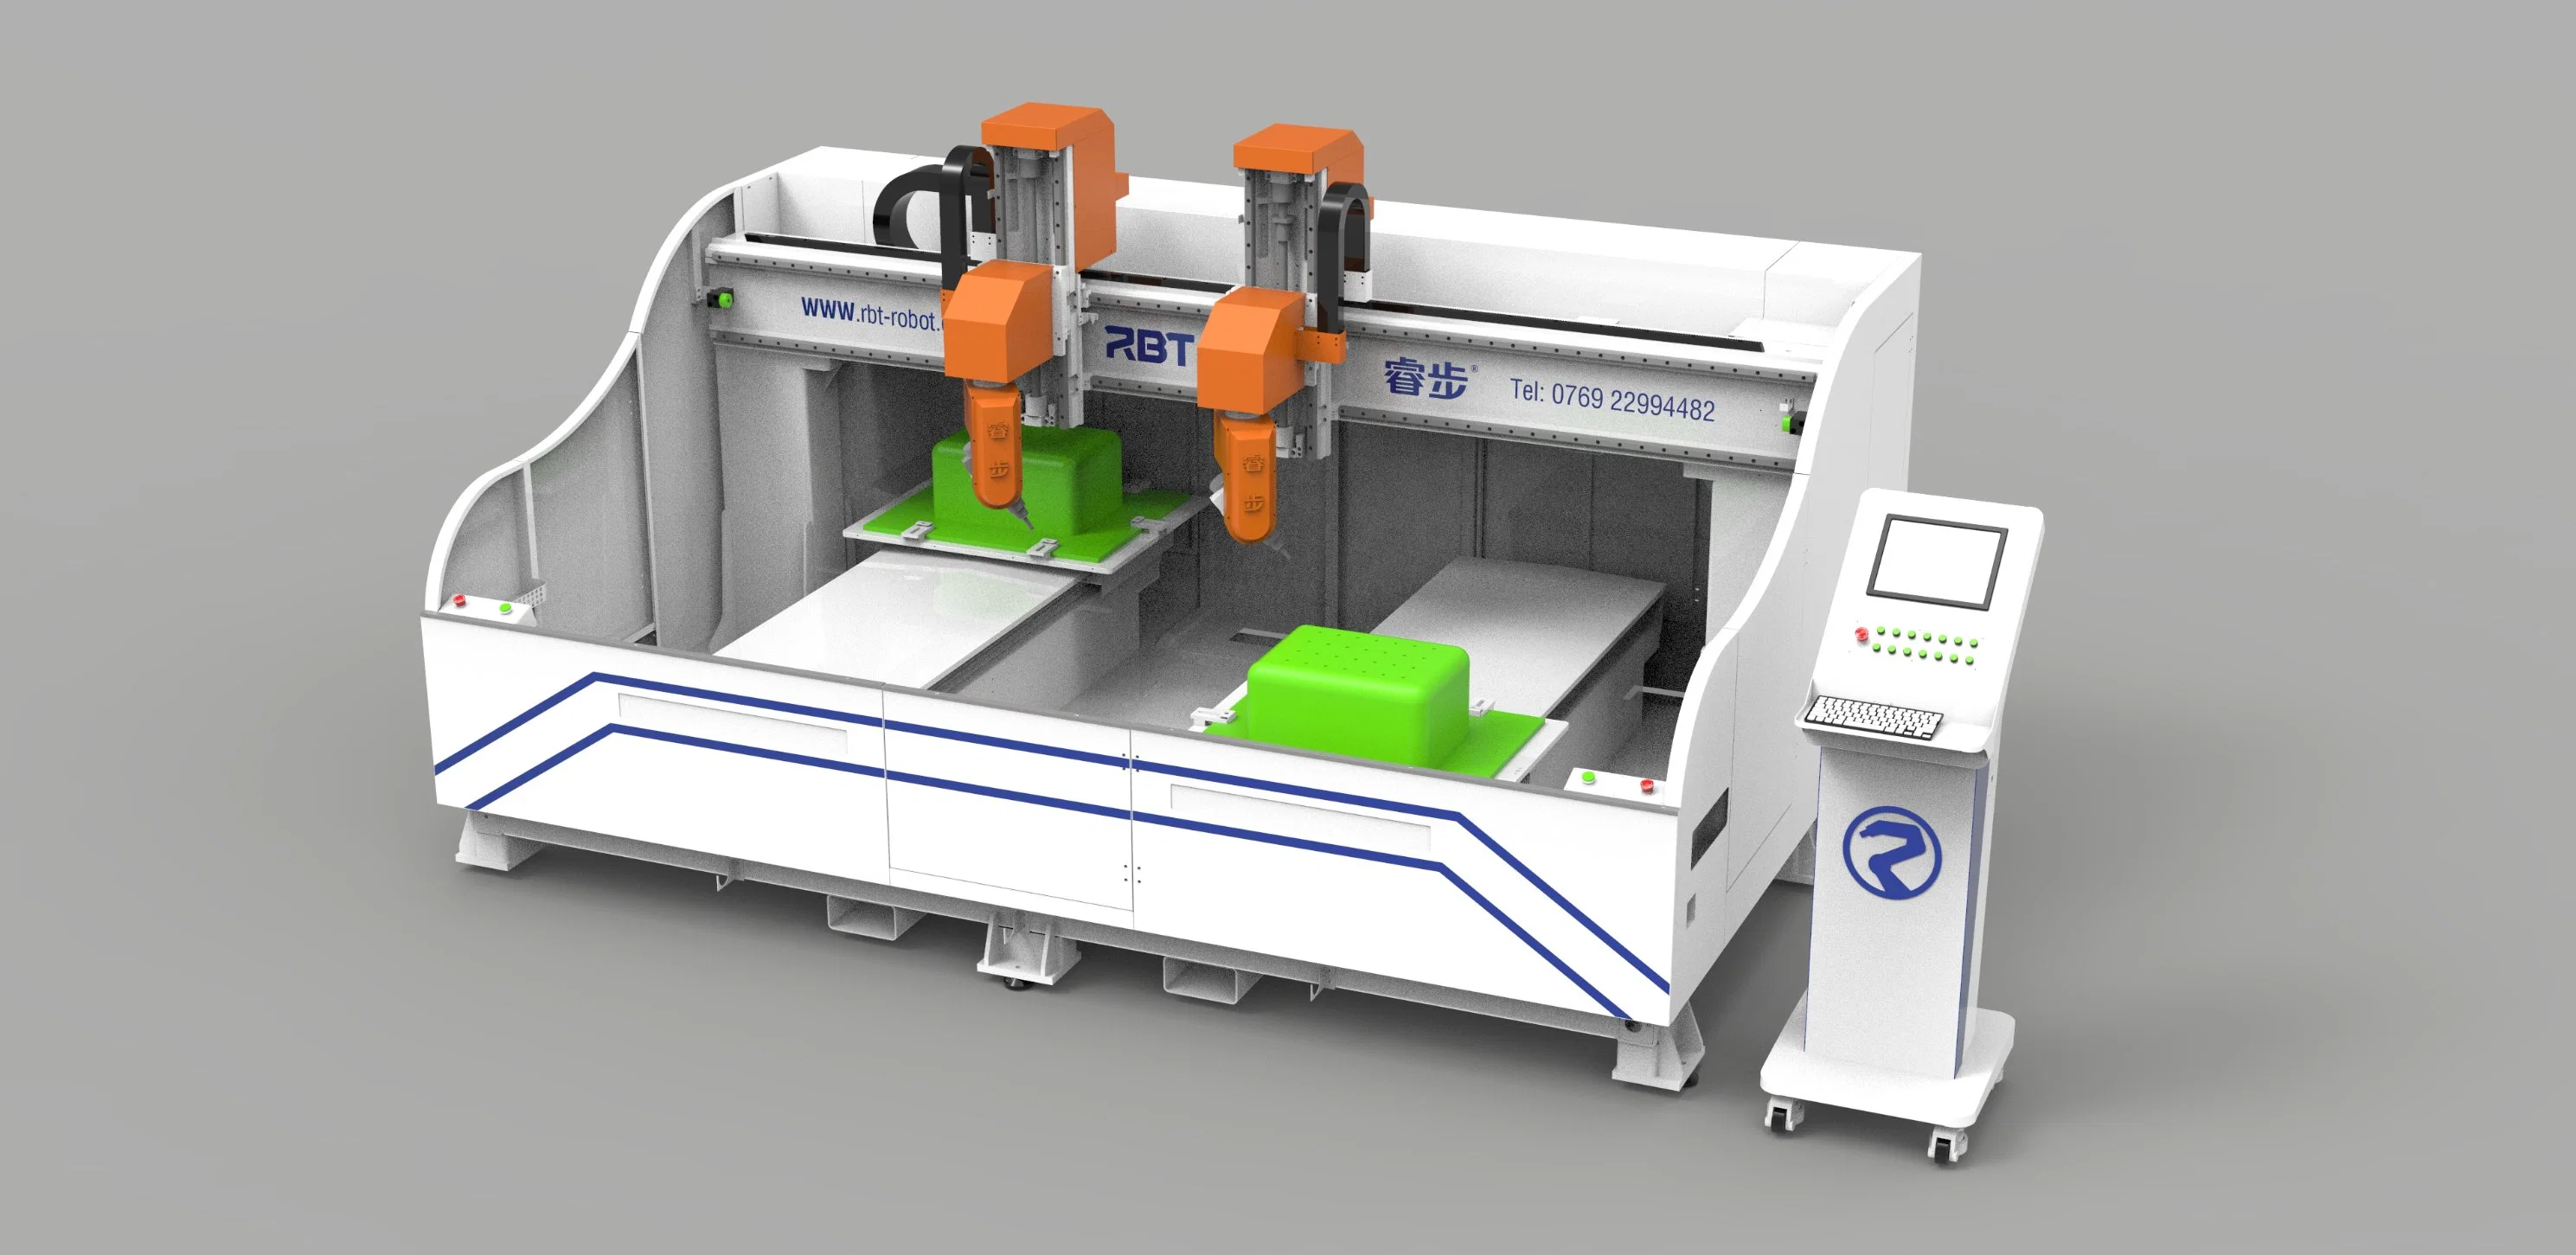 Rbt 10 Aixs CNC Cutting Machine for Luggage Punching and Trimming